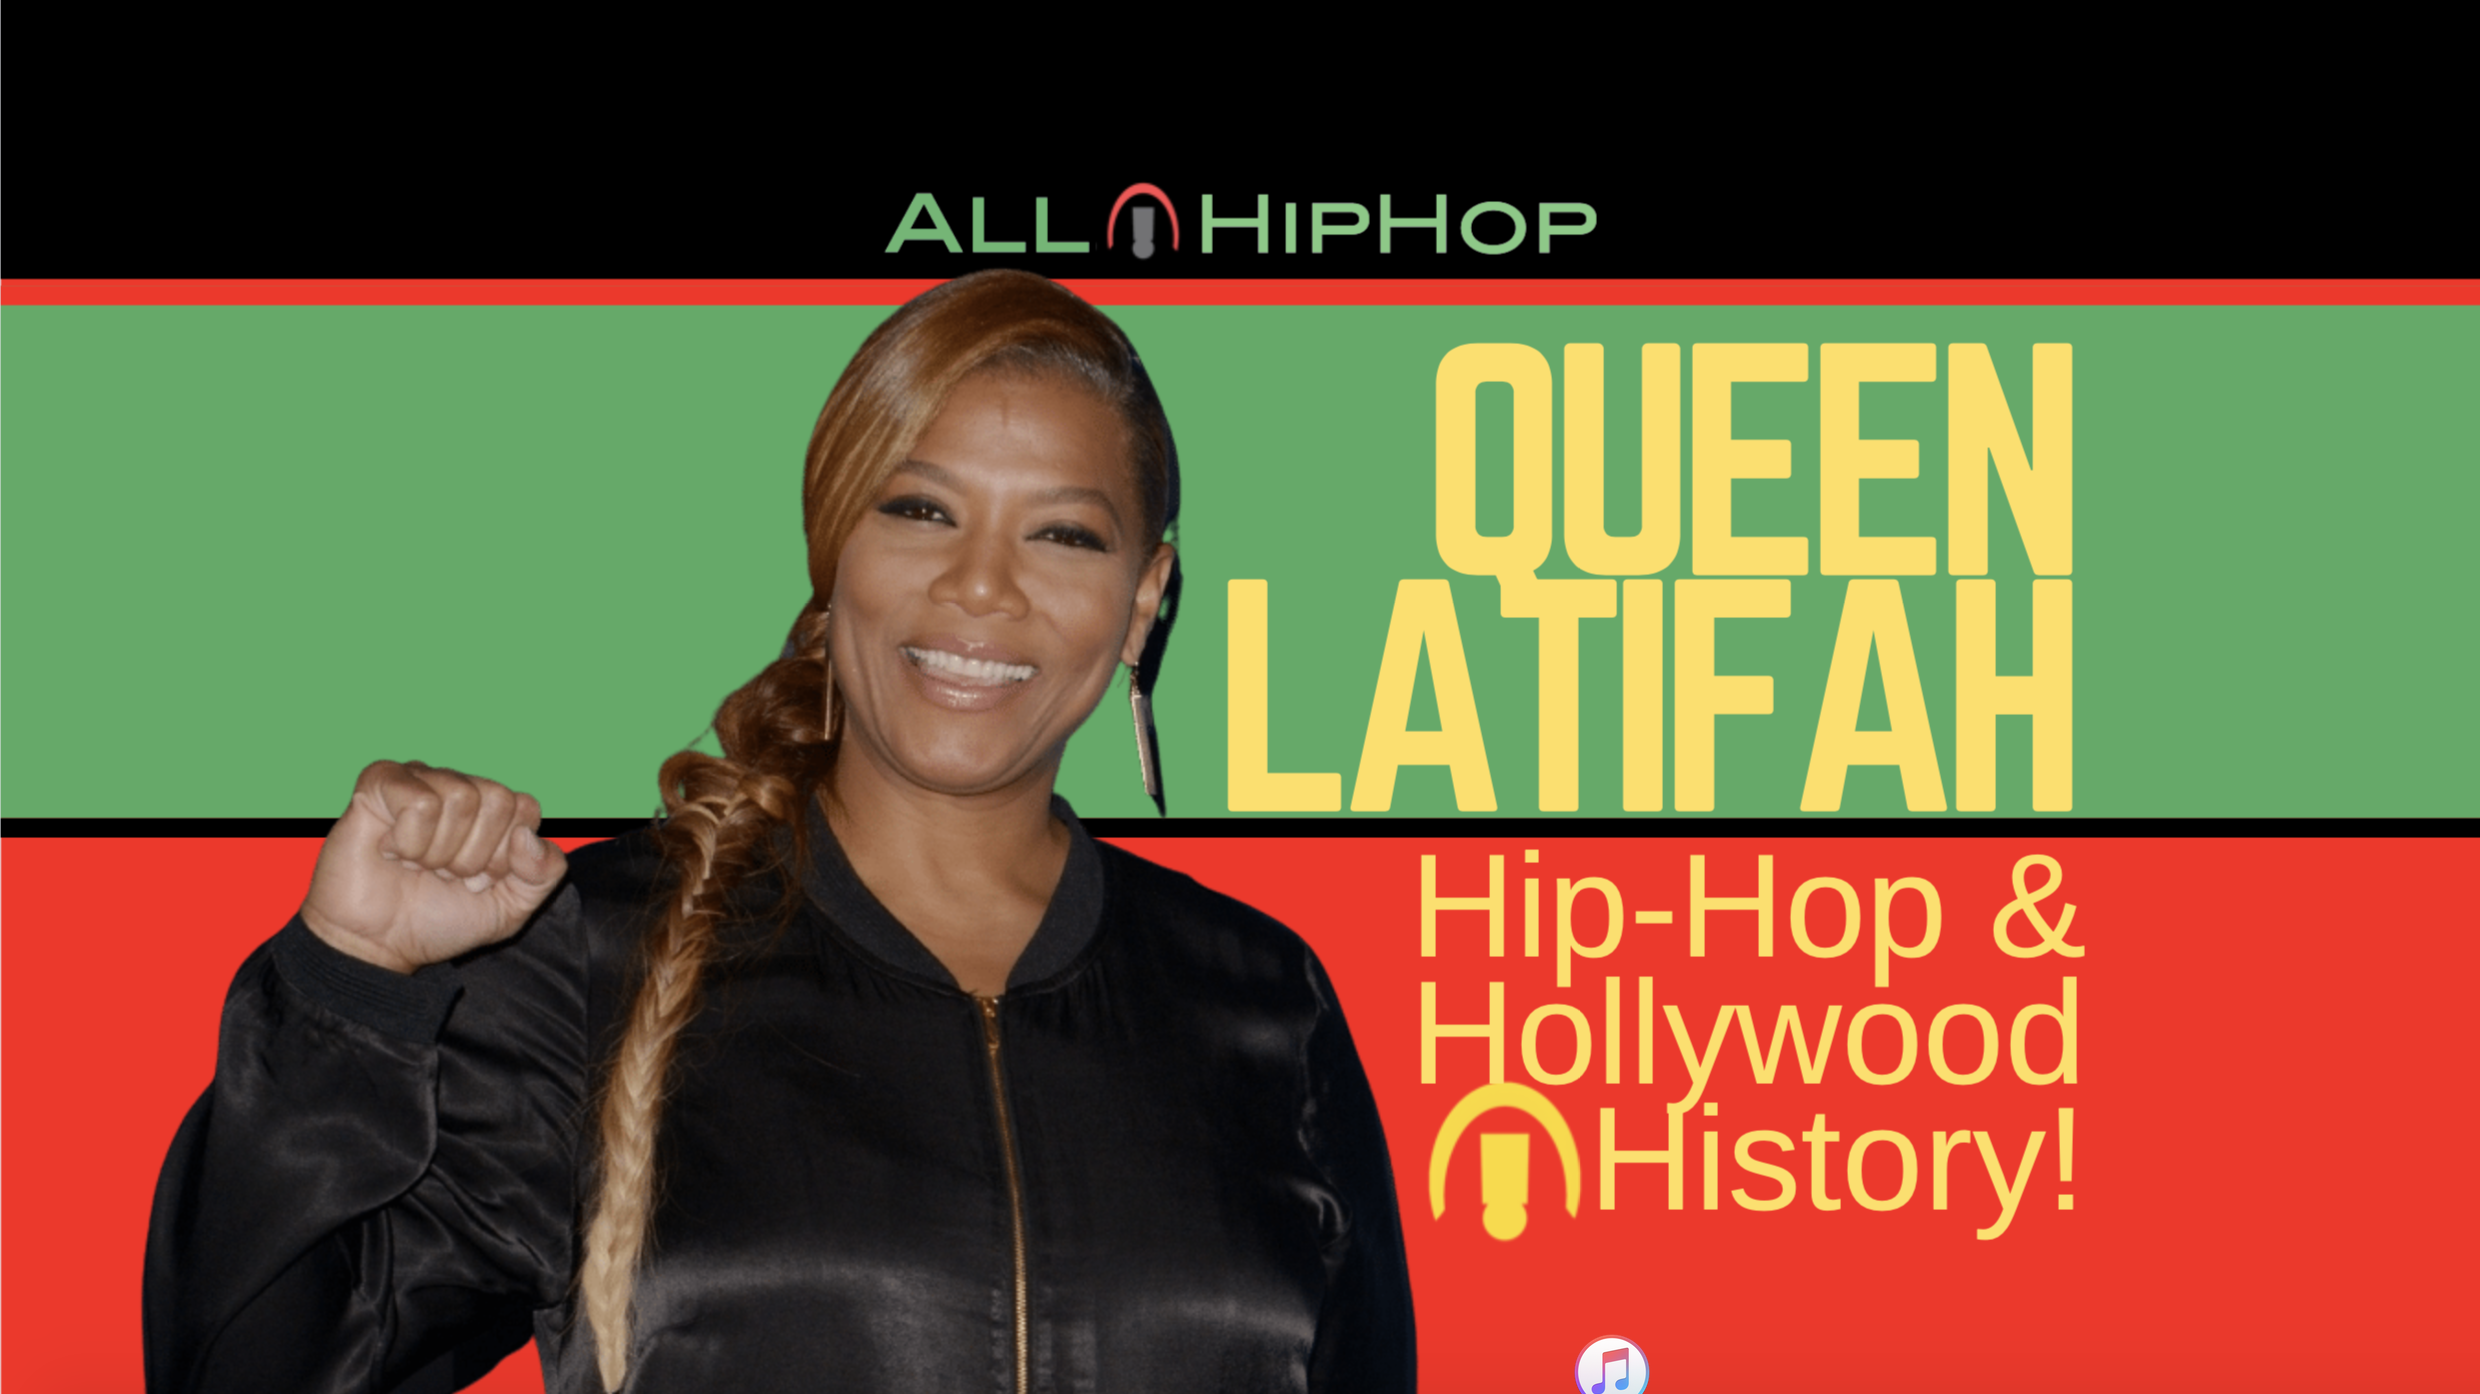 Queen Latifah - The First Hip-Hop Star On The Hollywood Walk Of